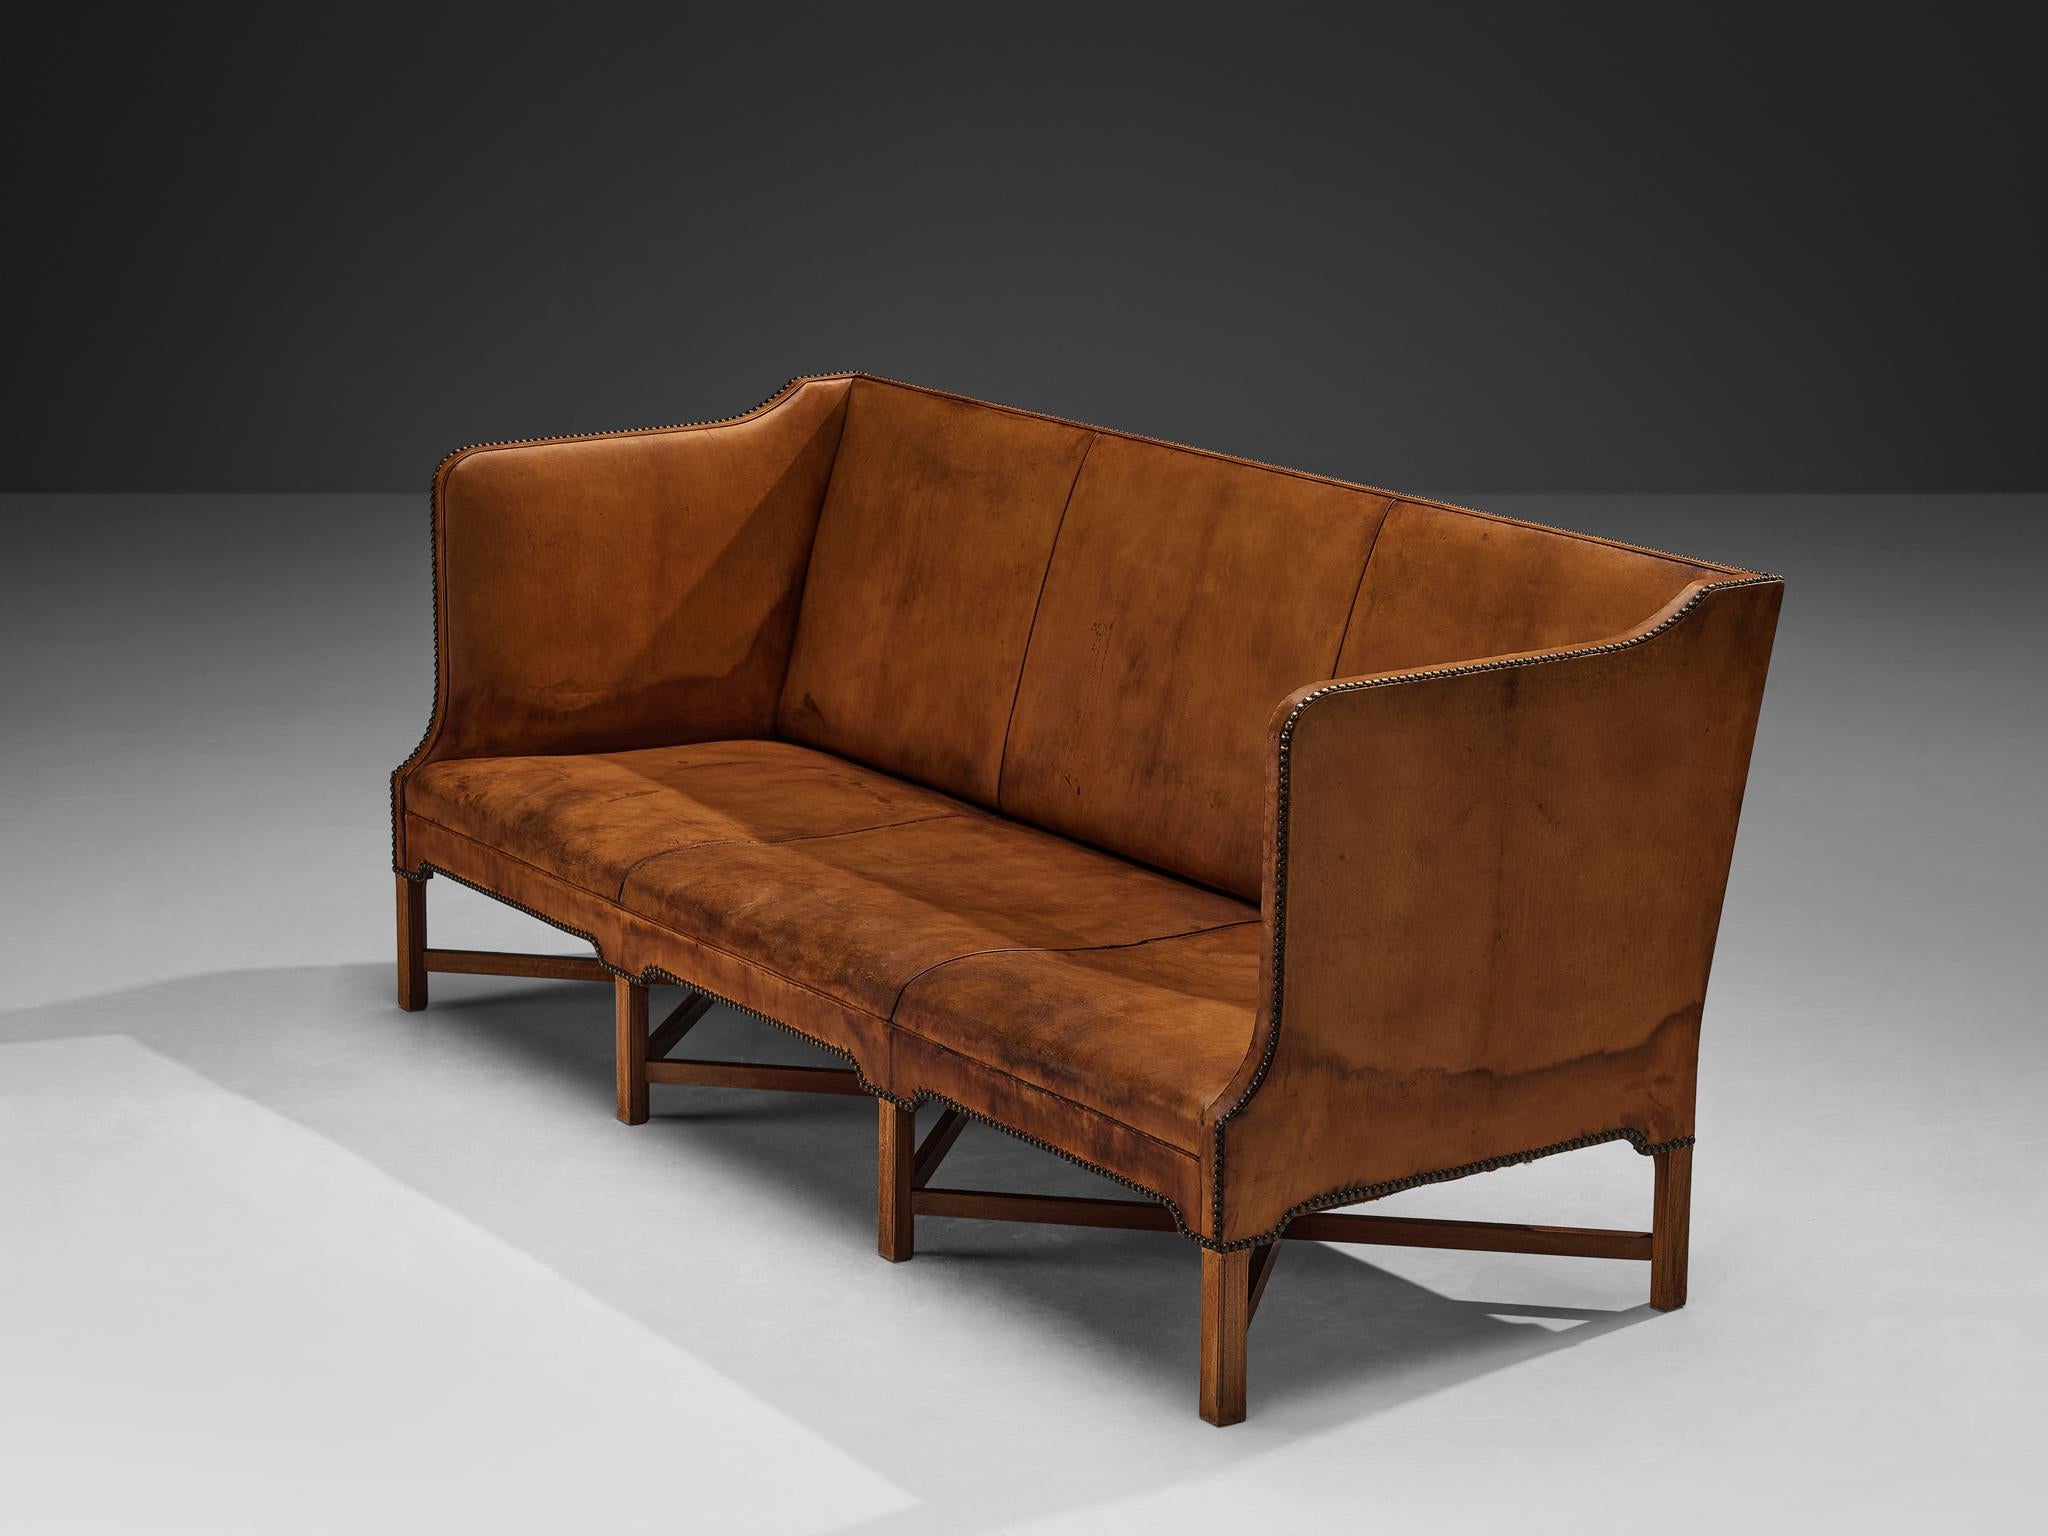 Mid-20th Century Kaare Klint for Rud Rasmussen Sofa in Original Niger Leather and Mahogany  For Sale